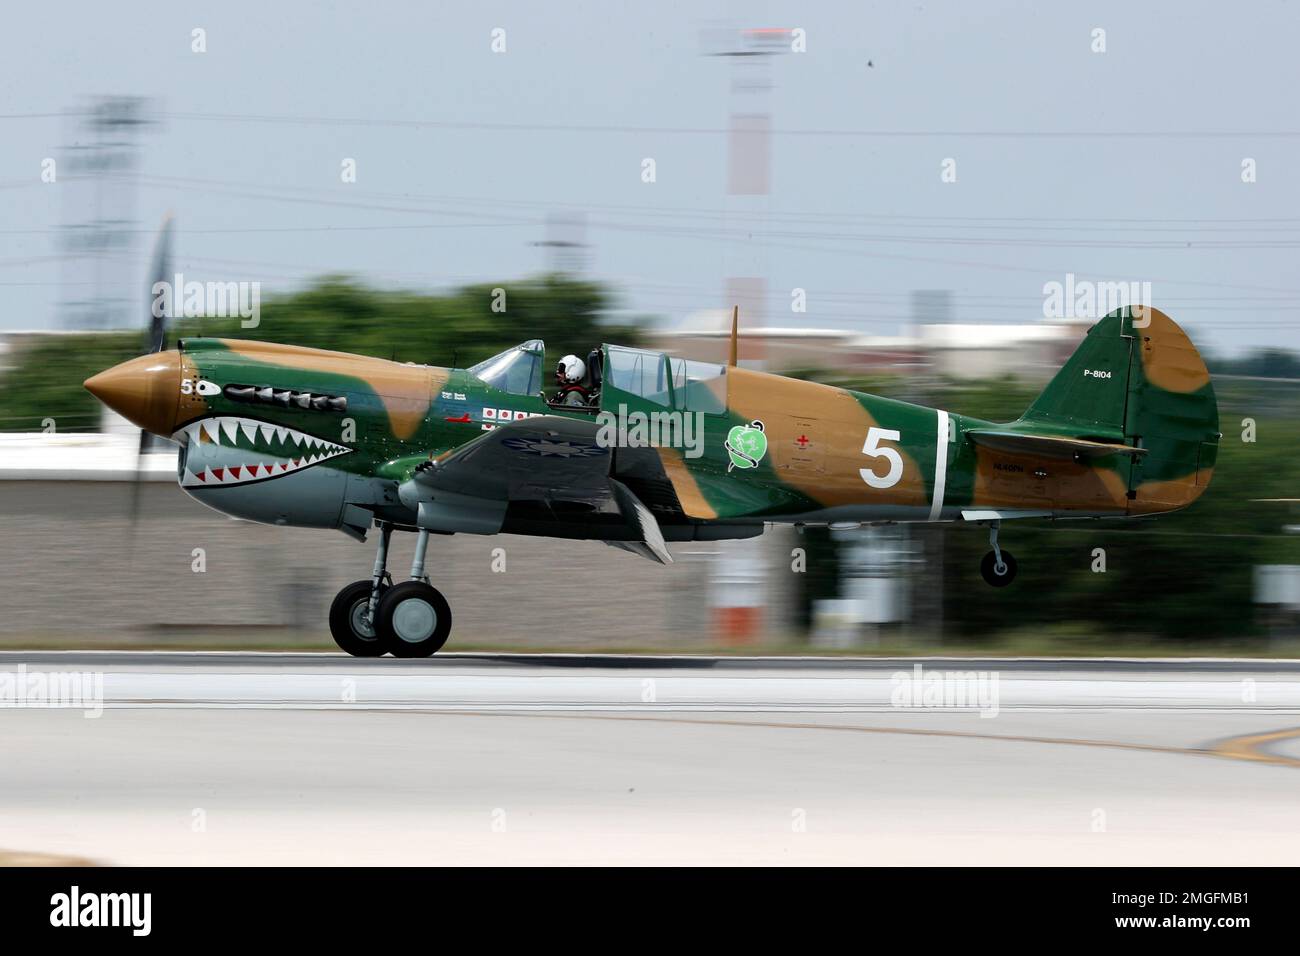 https://c8.alamy.com/comp/2MGFMB1/a-vintage-war-aircraft-from-the-cavanaugh-flight-museum-lands-at-addison-airport-in-addison-texas-friday-may-22-2020-the-aircraft-along-with-other-vintage-war-birds-flew-over-several-medical-facilities-and-other-locations-in-a-tribute-they-call-addisons-salute-to-heroes-ap-phototony-gutierrez-2MGFMB1.jpg